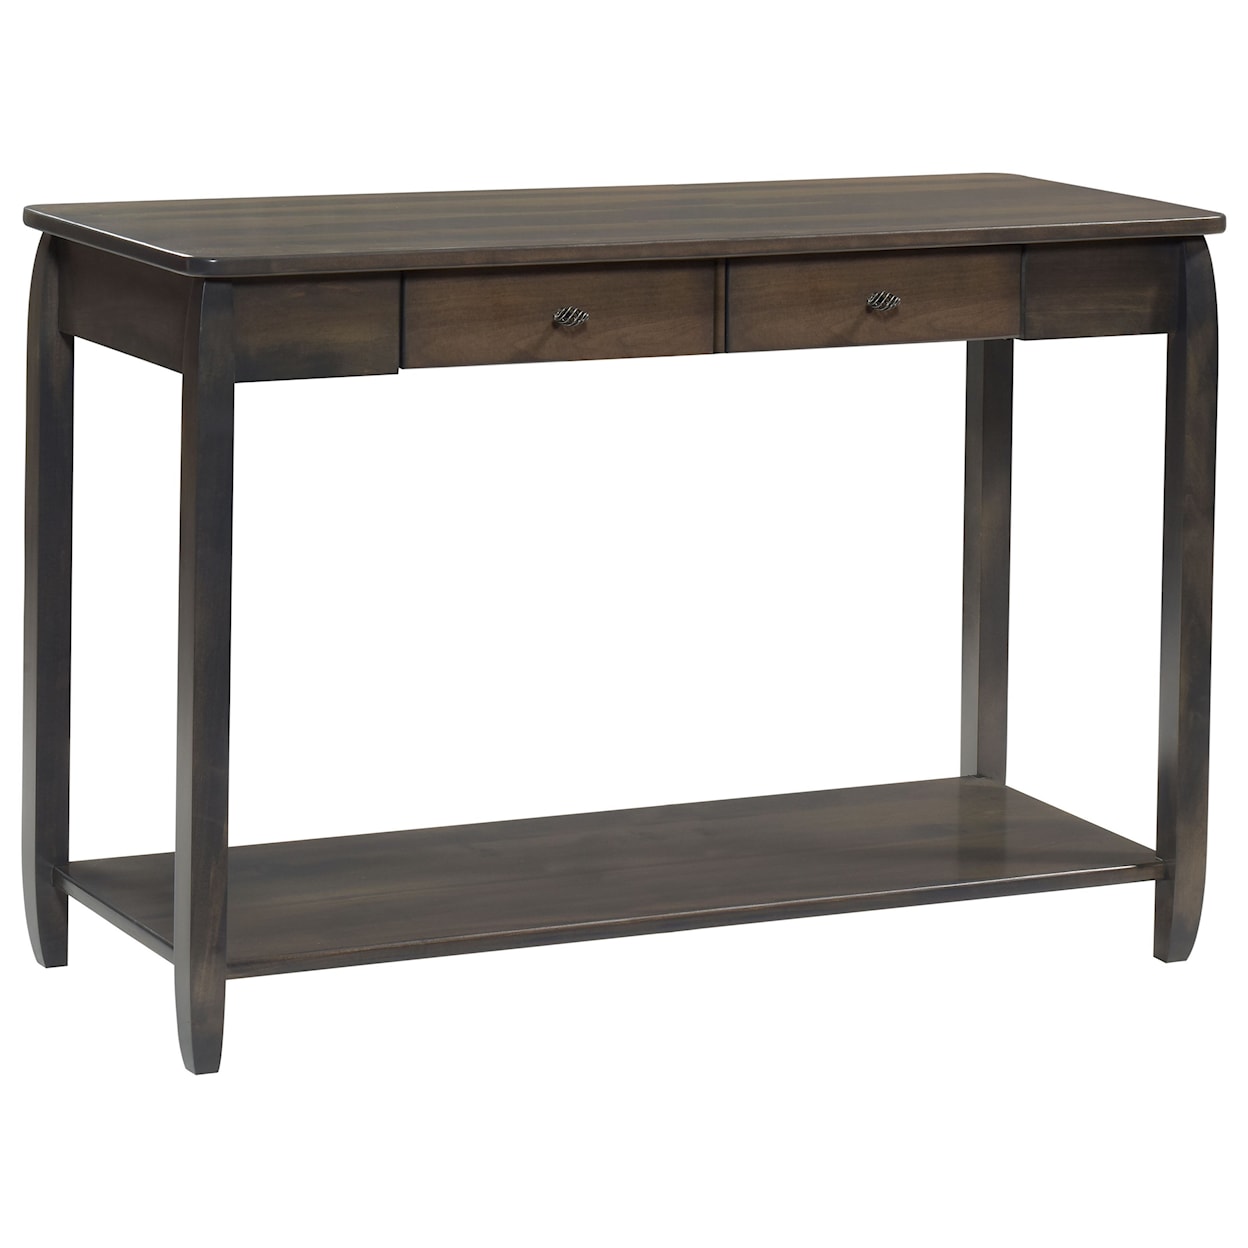 Y & T Woodcraft Apache Hall Table